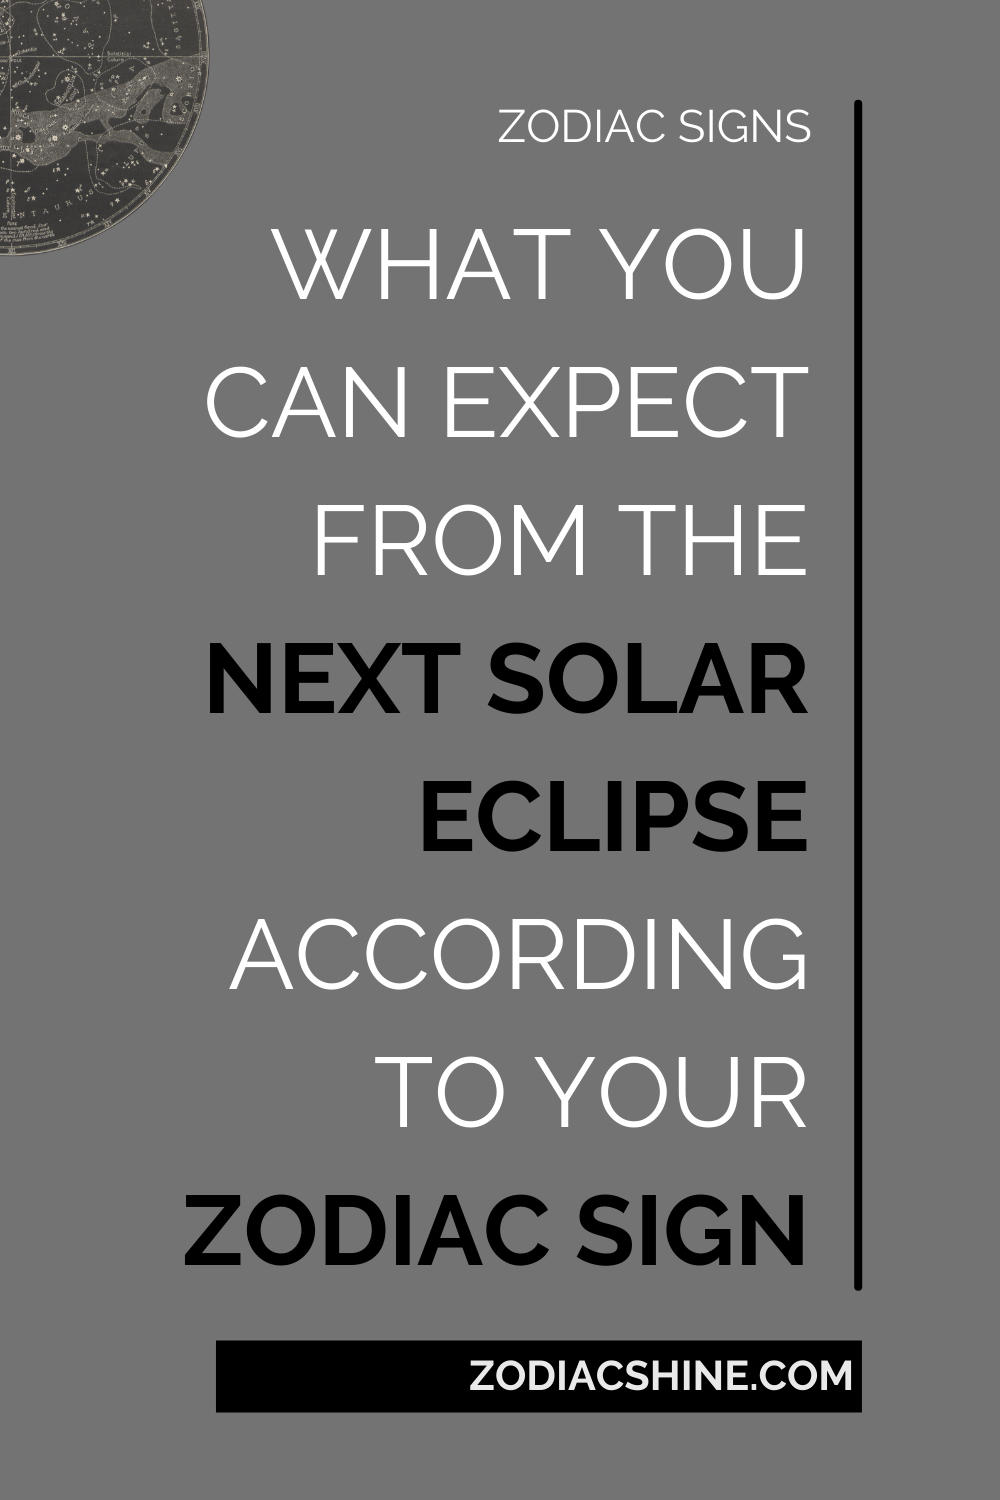 What You Can Expect From The Next Solar Eclipse According To Your Zodiac Sign